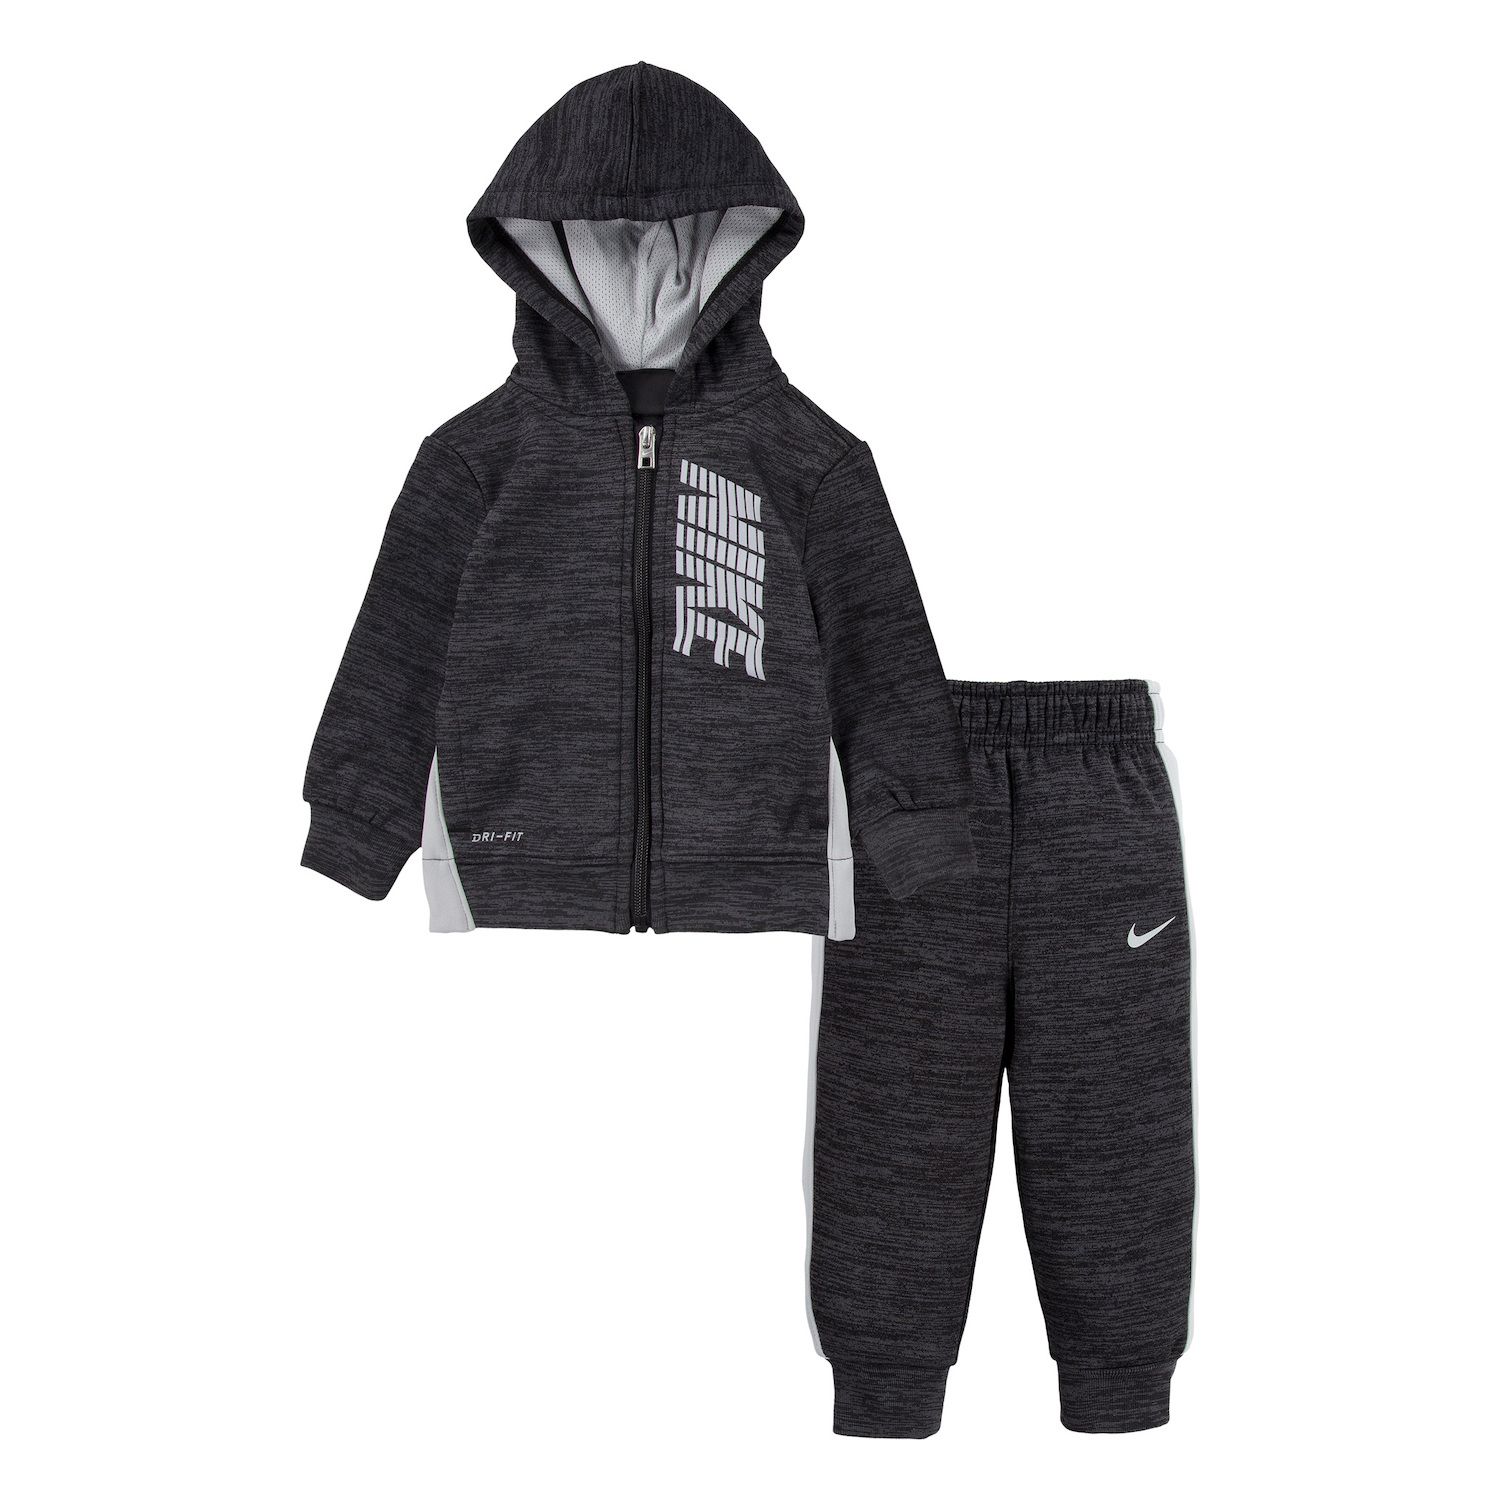 24 month boy nike clothes